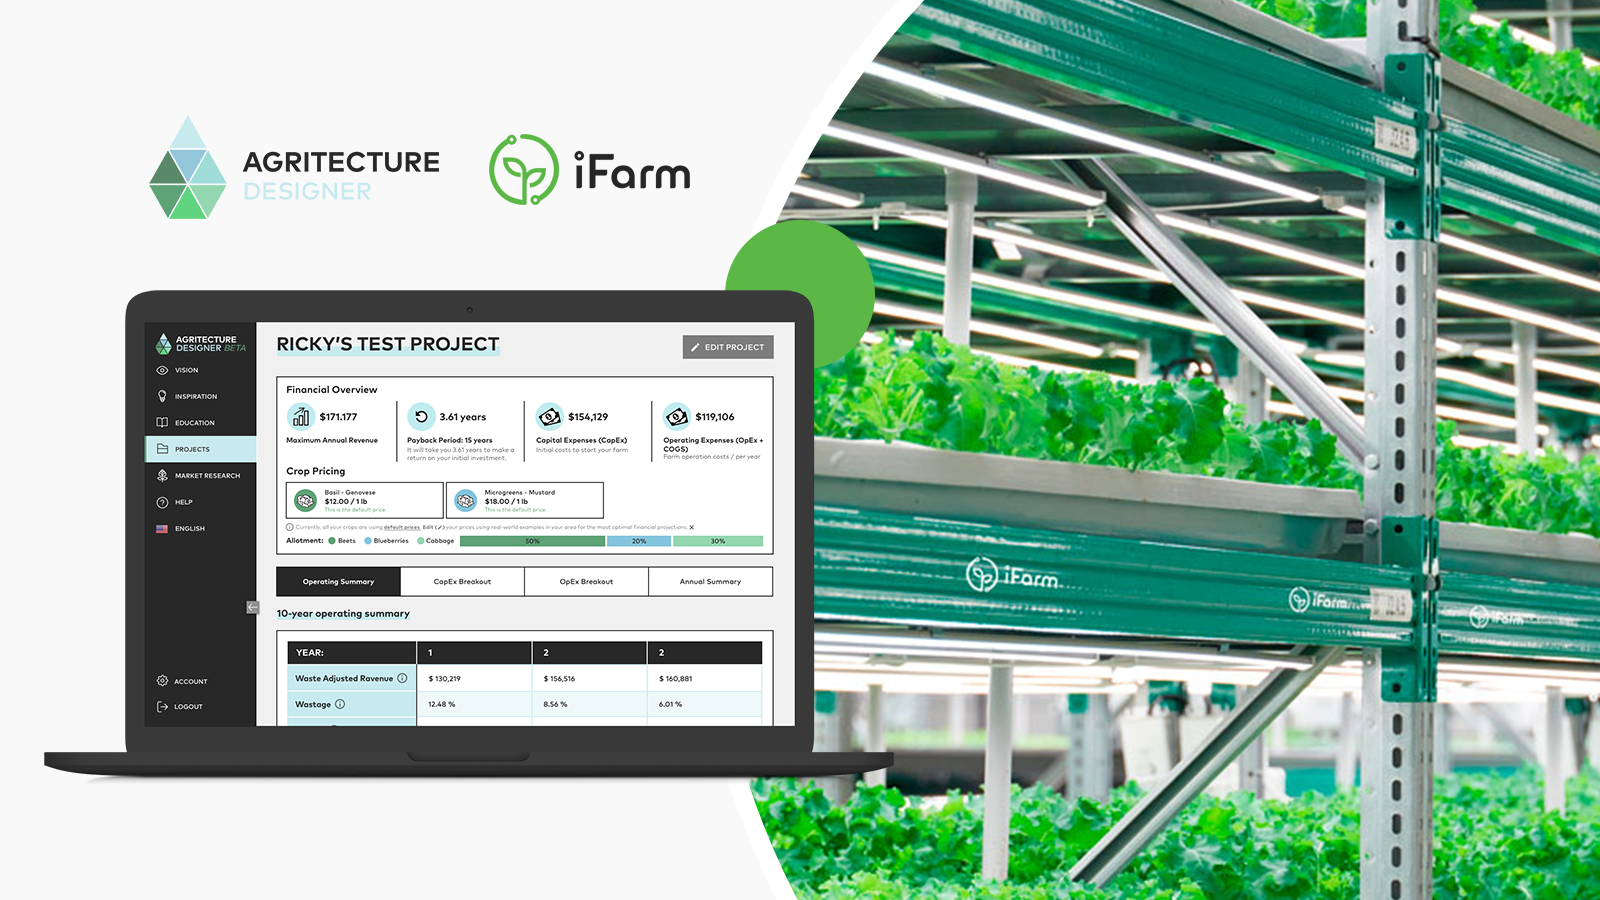 iFarm Partners with Agritecture Designer to simplify the first steps for first-time urban farmers.